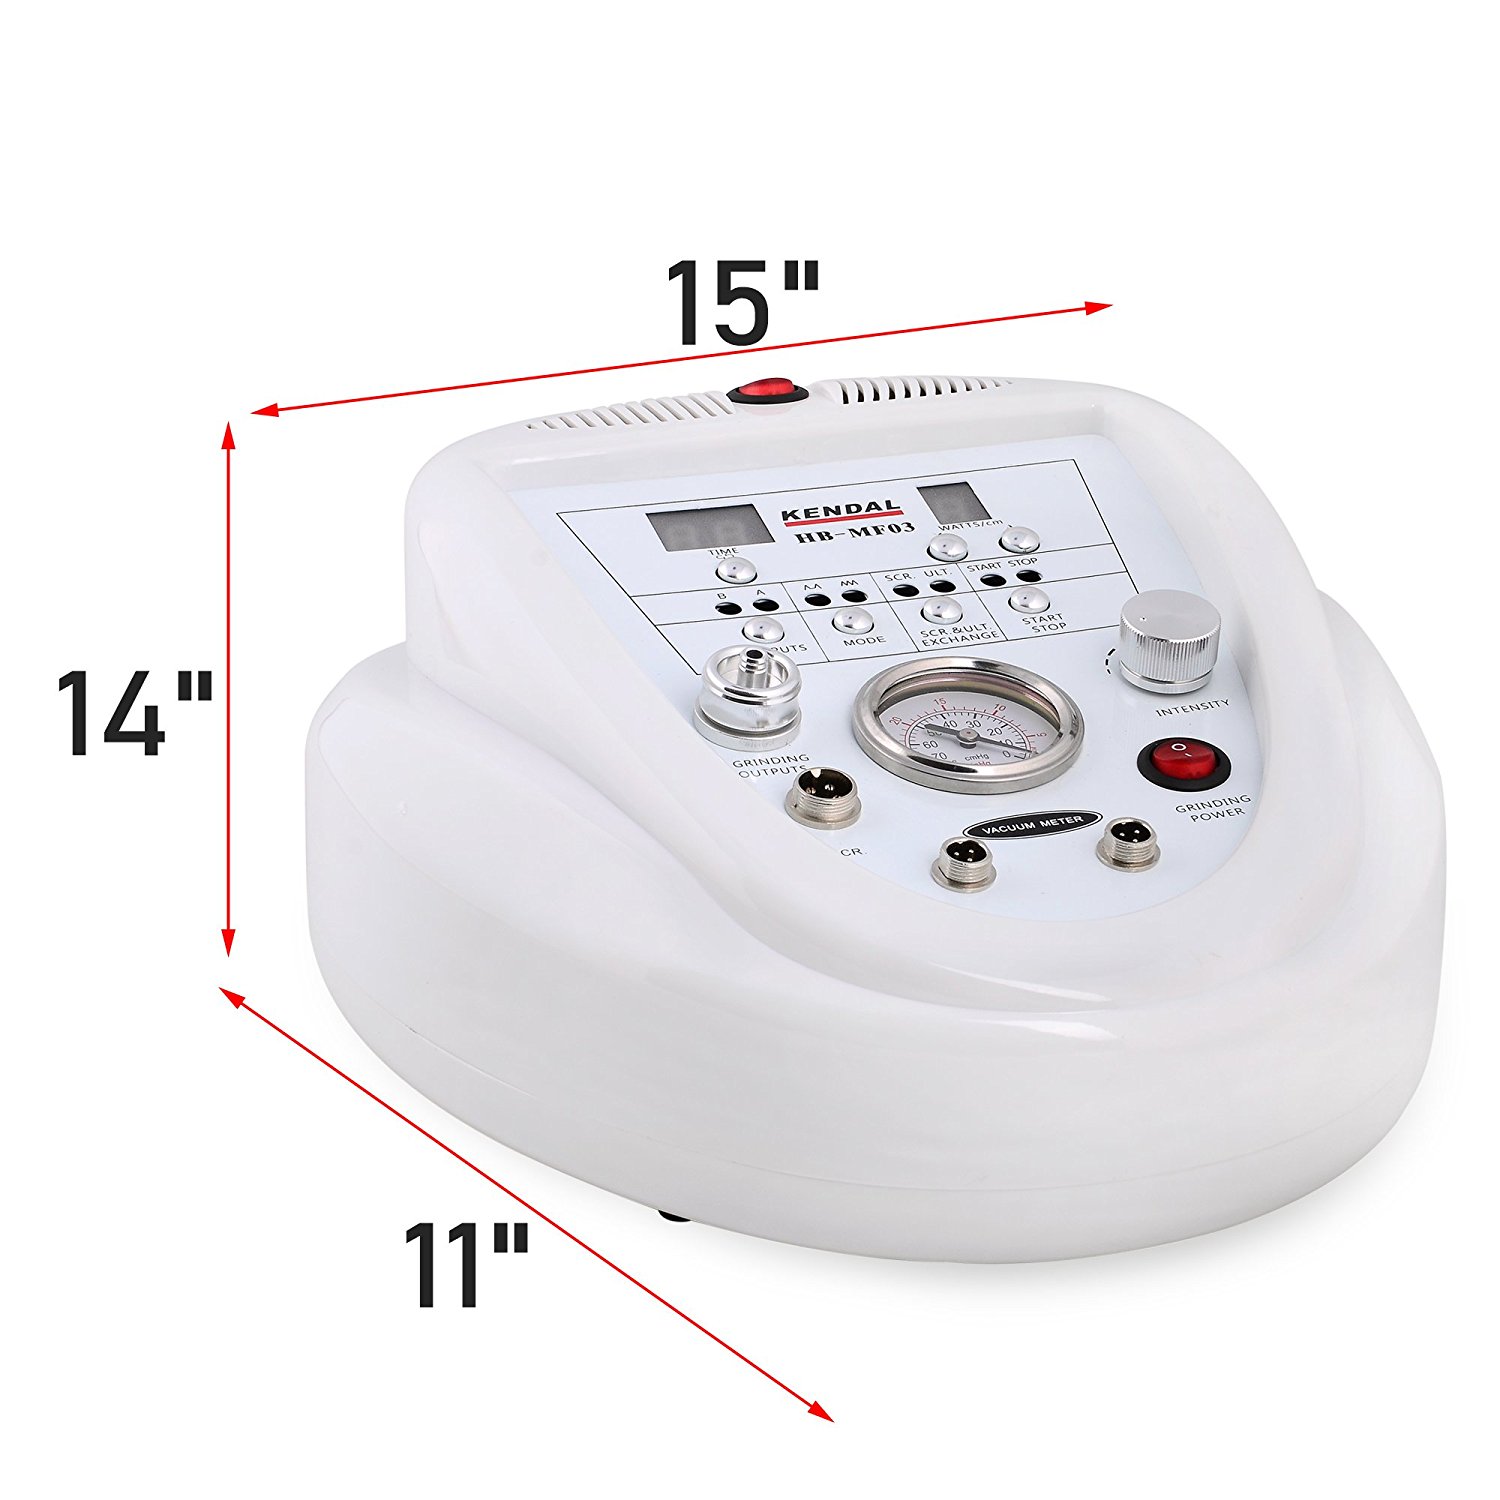 Kendal 3 in 1 Professional Diamond Microdermabrasion Machine - image 3 of 9